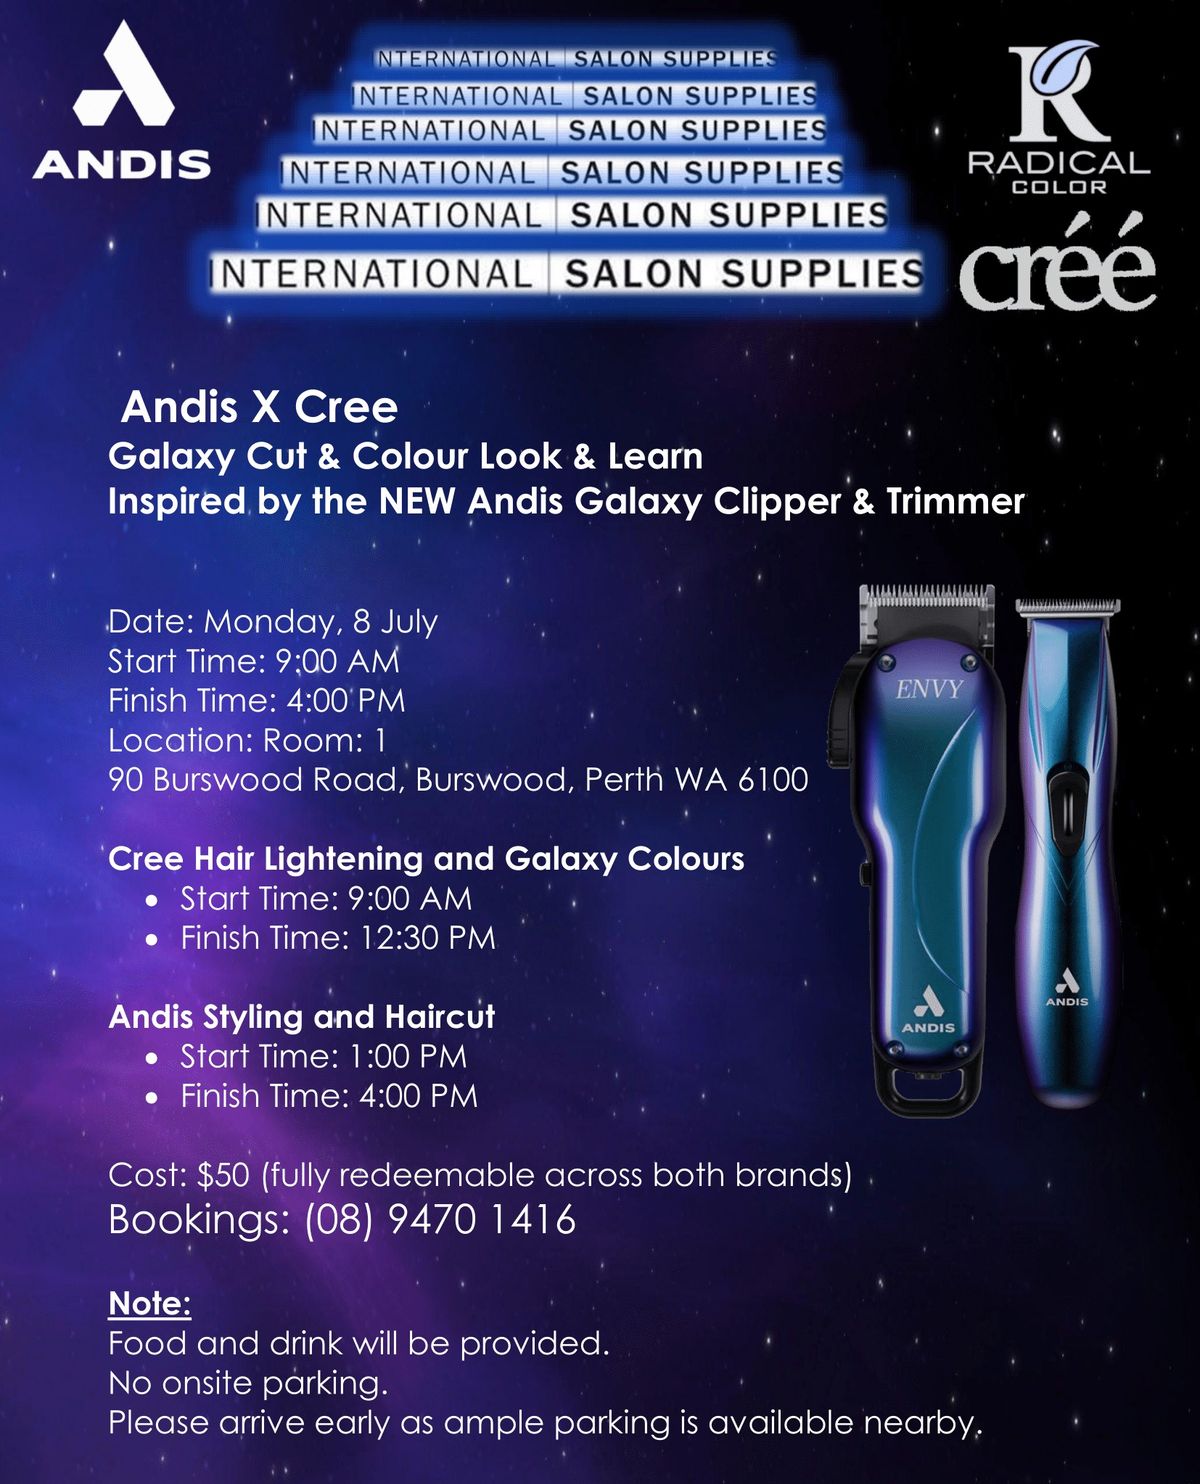 Andis X Cree \u2013 Galaxy Cut & Colour Look and Learn